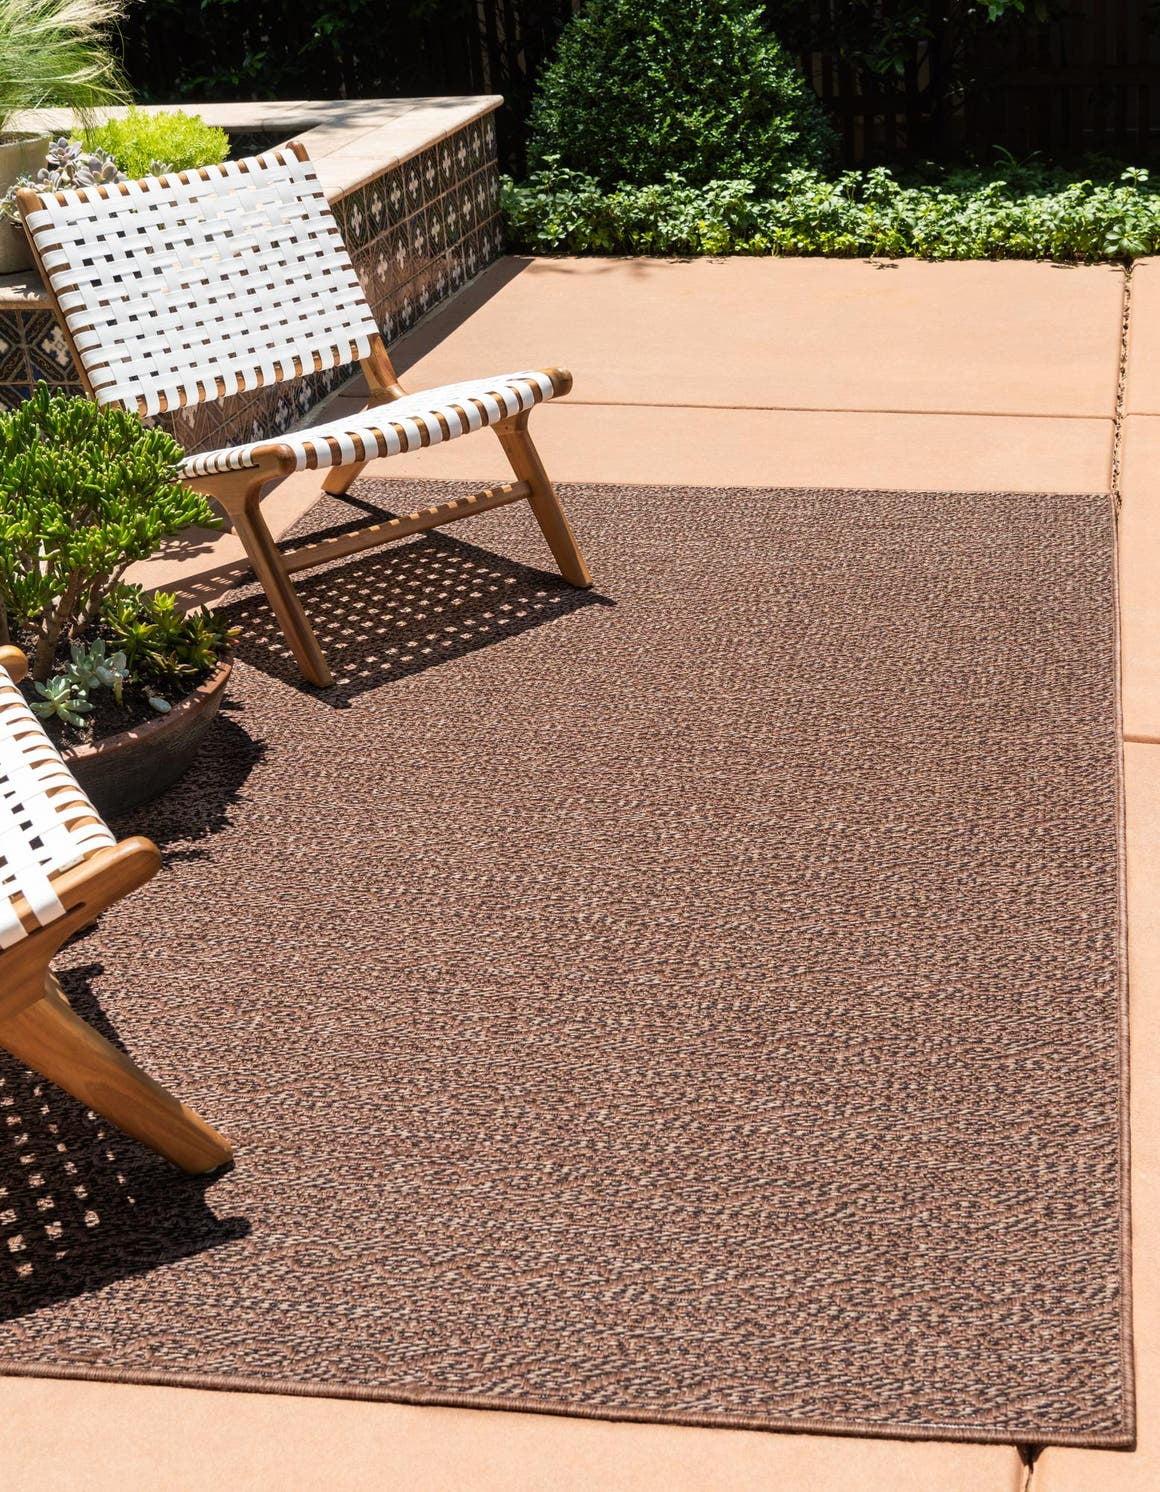 Easy-Care Washable Brown Stripe Synthetic Outdoor Rug 8' x 11'4"